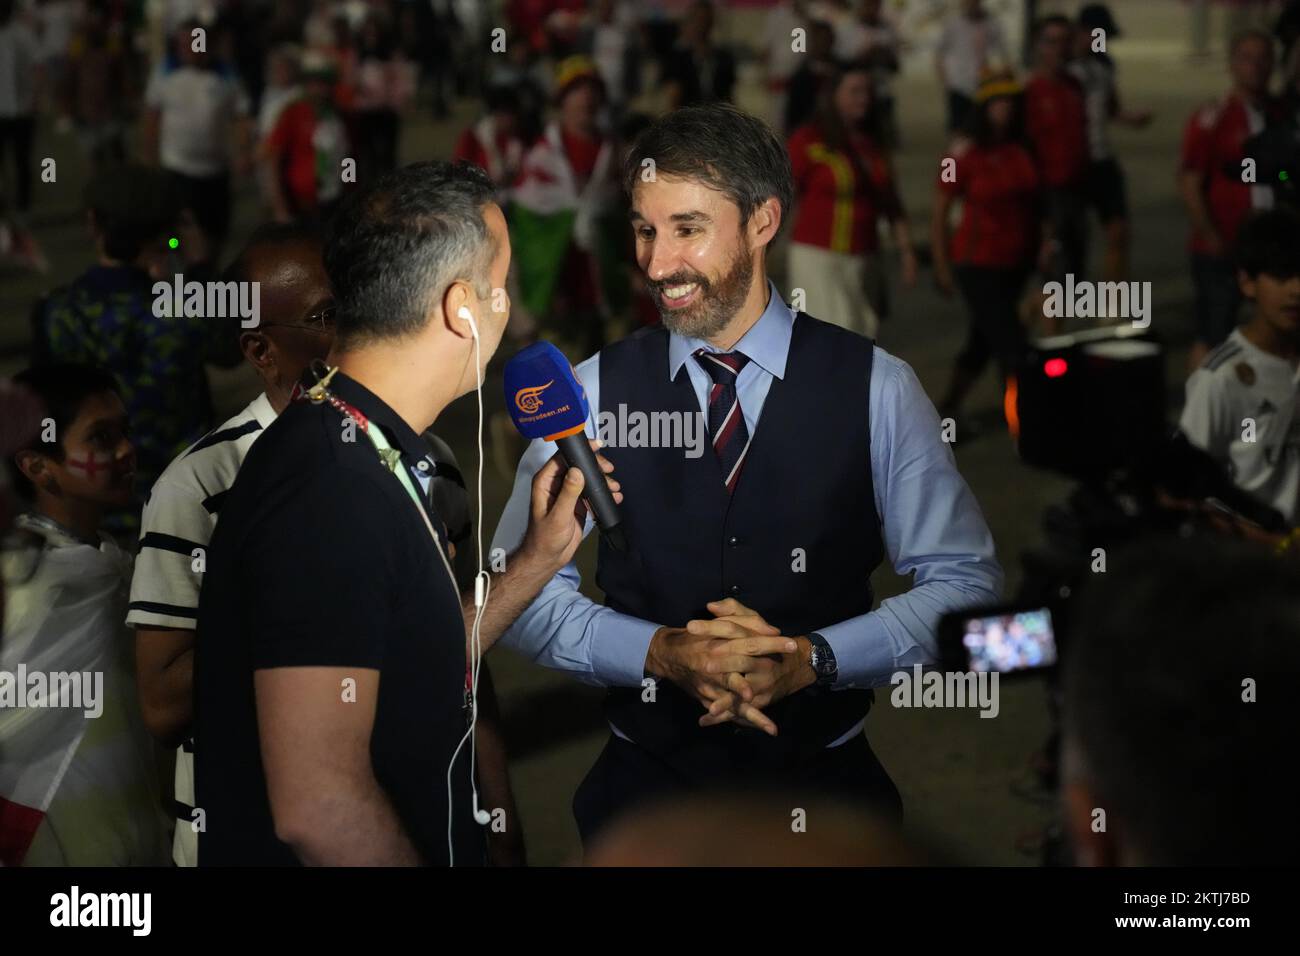 Neil Rowe, a Gareth Southgate impersonator, being interviewed by Lebanon media channel Al Mayadeen outside the stadium following the FIFA World Cup Group B match between Wales and England. Picture date: Tuesday November 29, 2022. Stock Photo